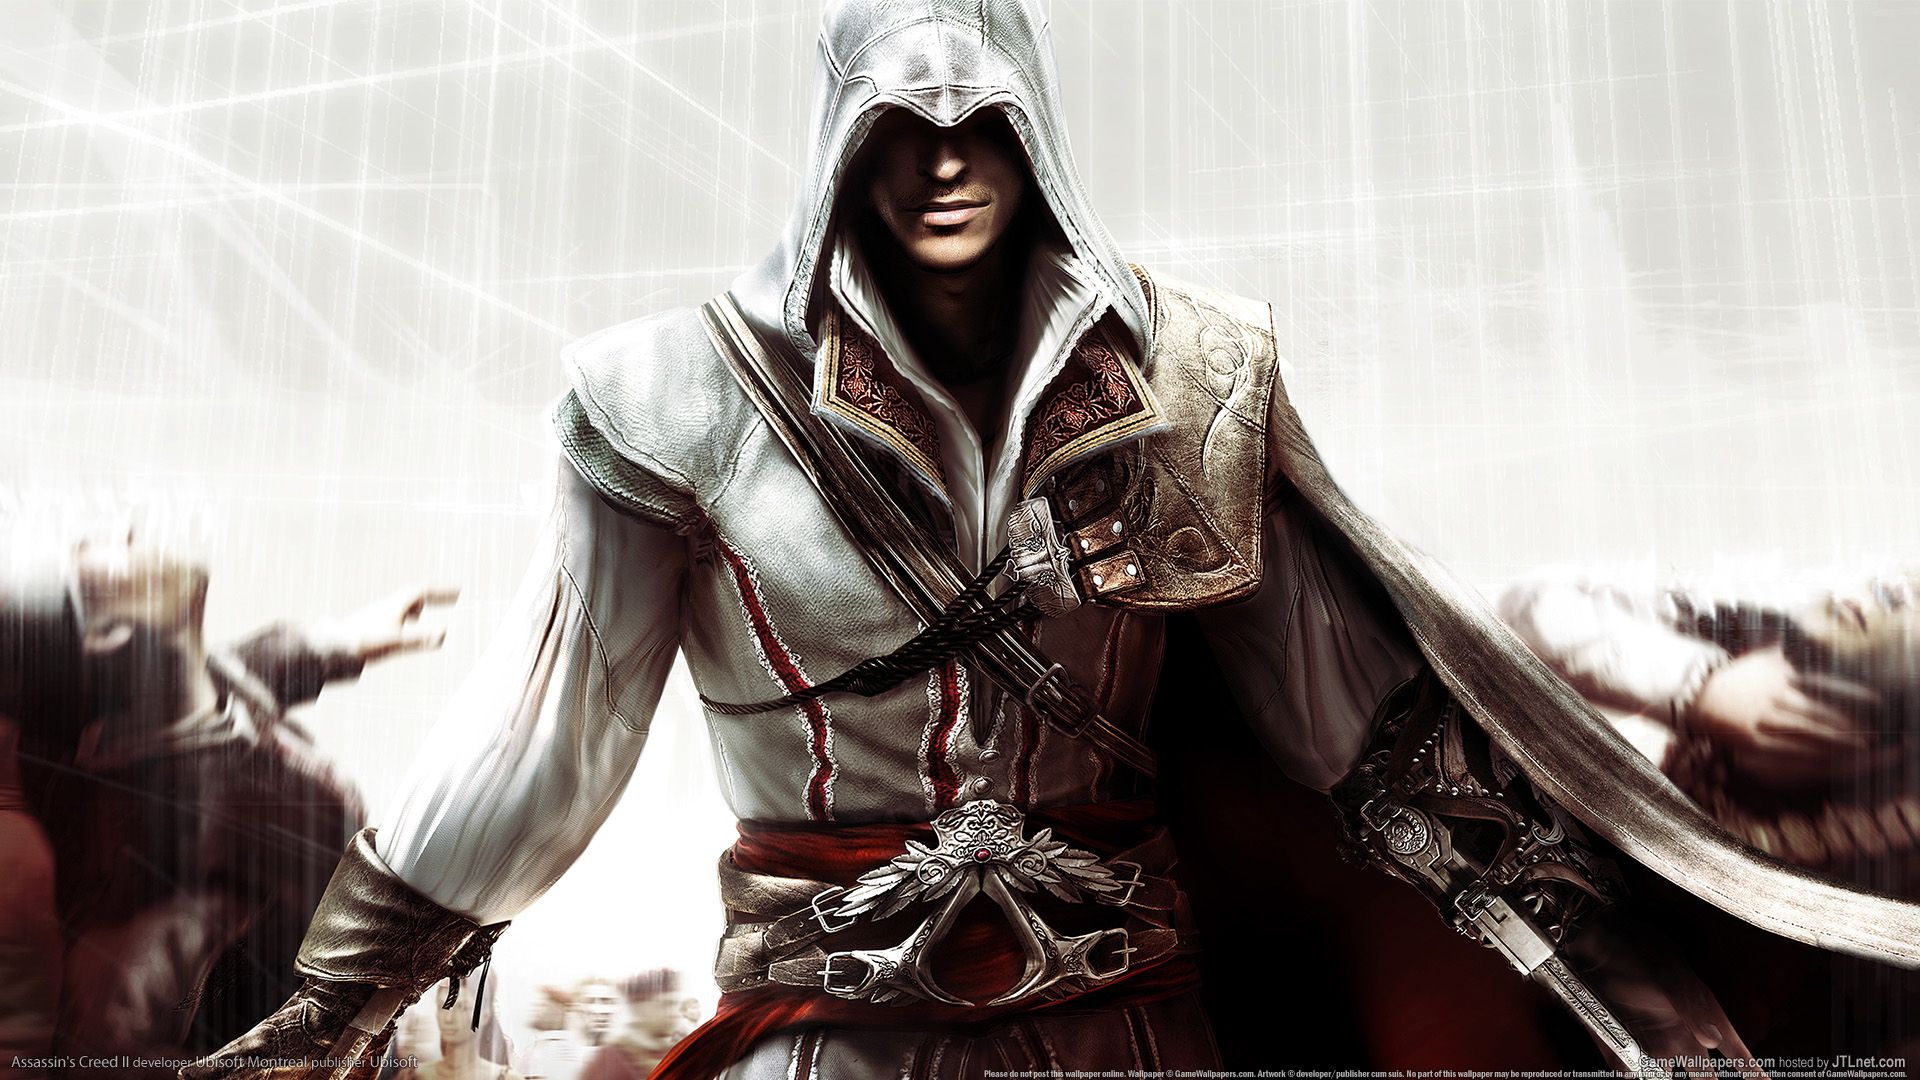 Assassins Creed II Best Game HD Wallpapers - All HD Backgrounds